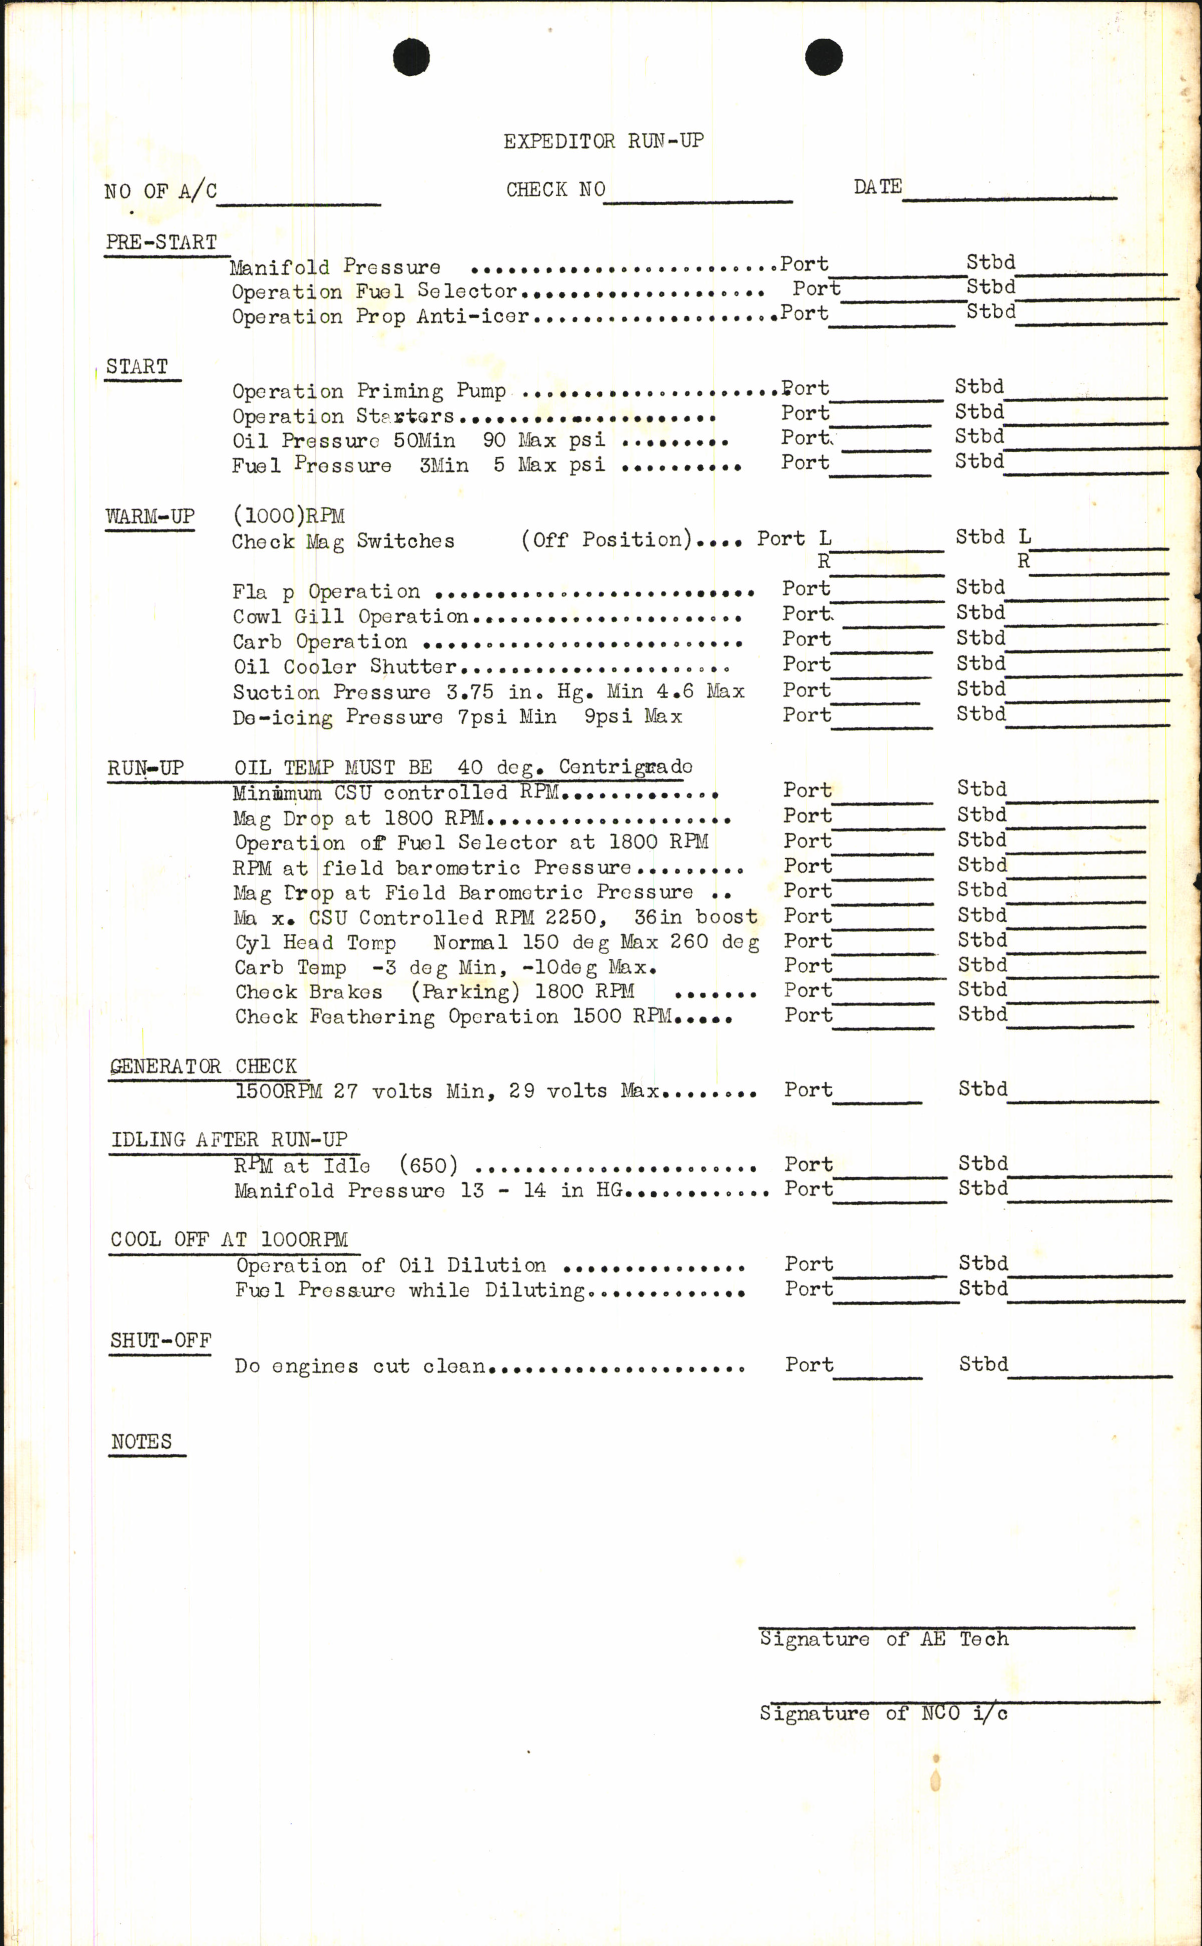 Sample page 1 from AirCorps Library document: Expeditor Run Up